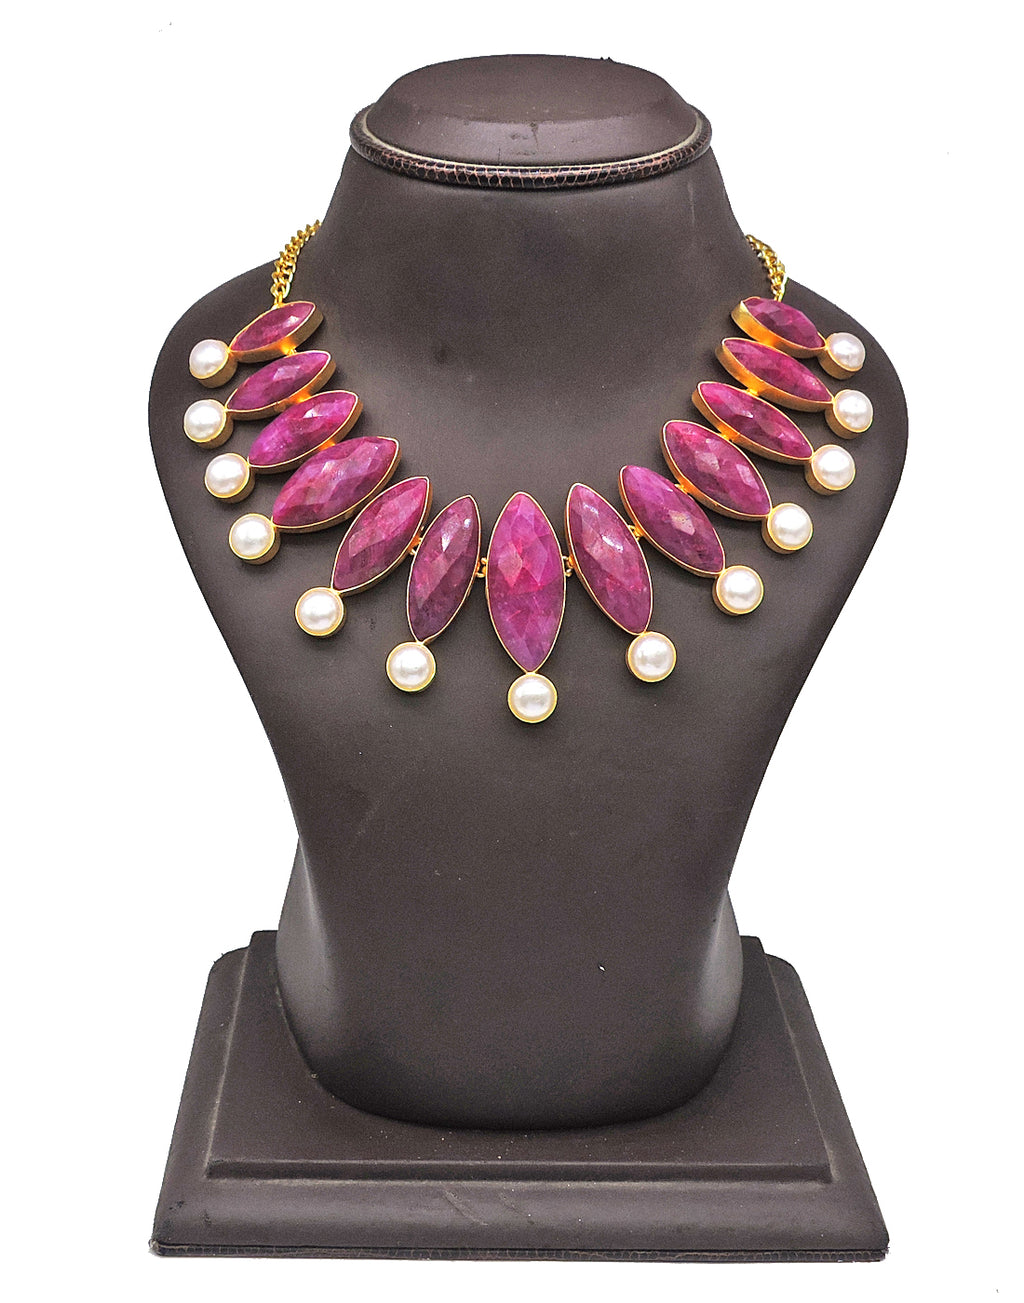 Red Haathi & Pearl Necklace - Statement Necklaces - Gold-Plated & Hypoallergenic Jewellery - Made in India - Dubai Jewellery - Dori